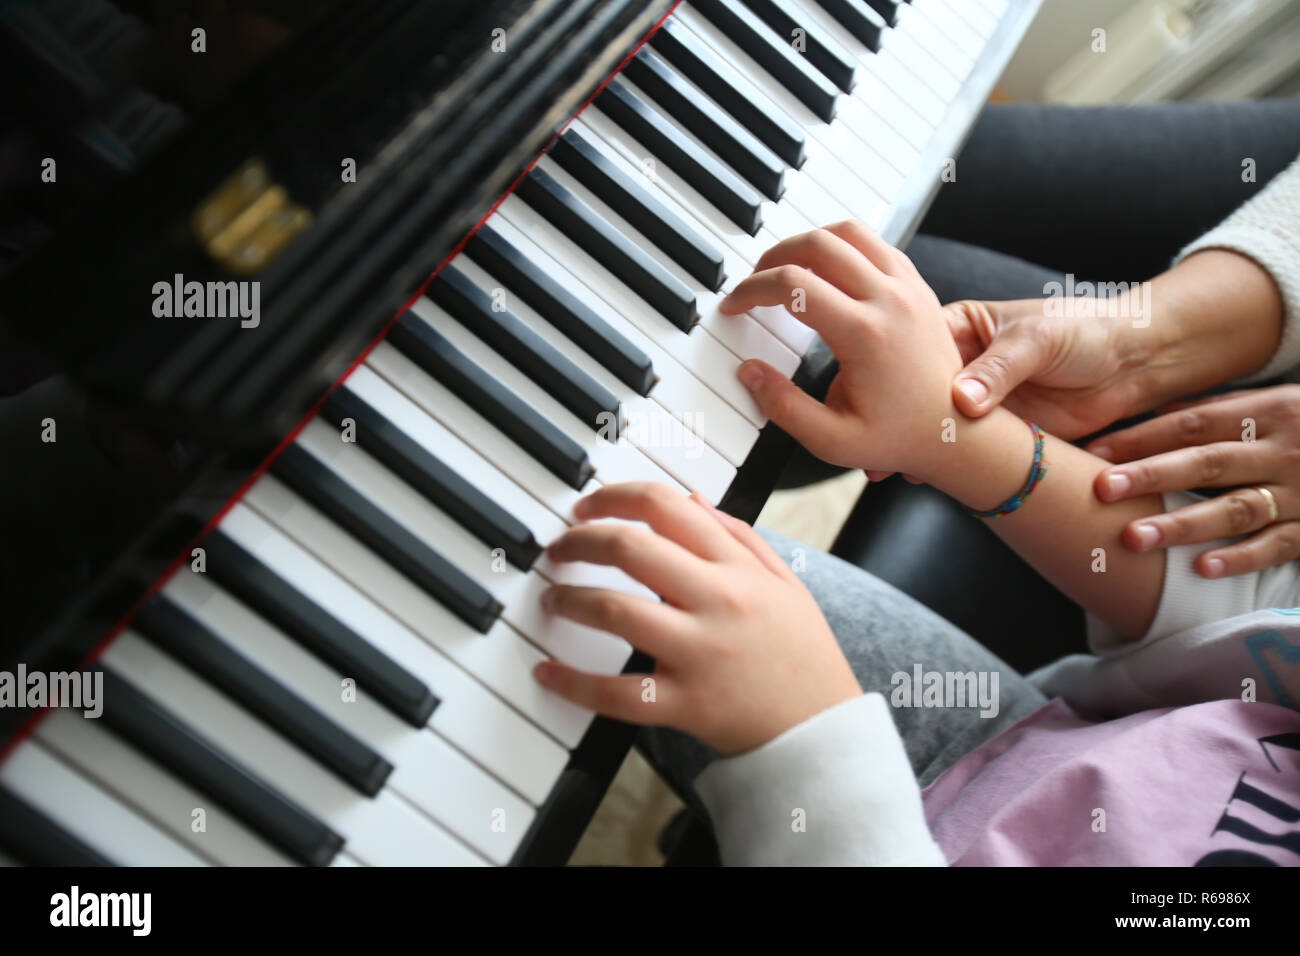 A teacher teaches playing the piano her student. Stock Photo